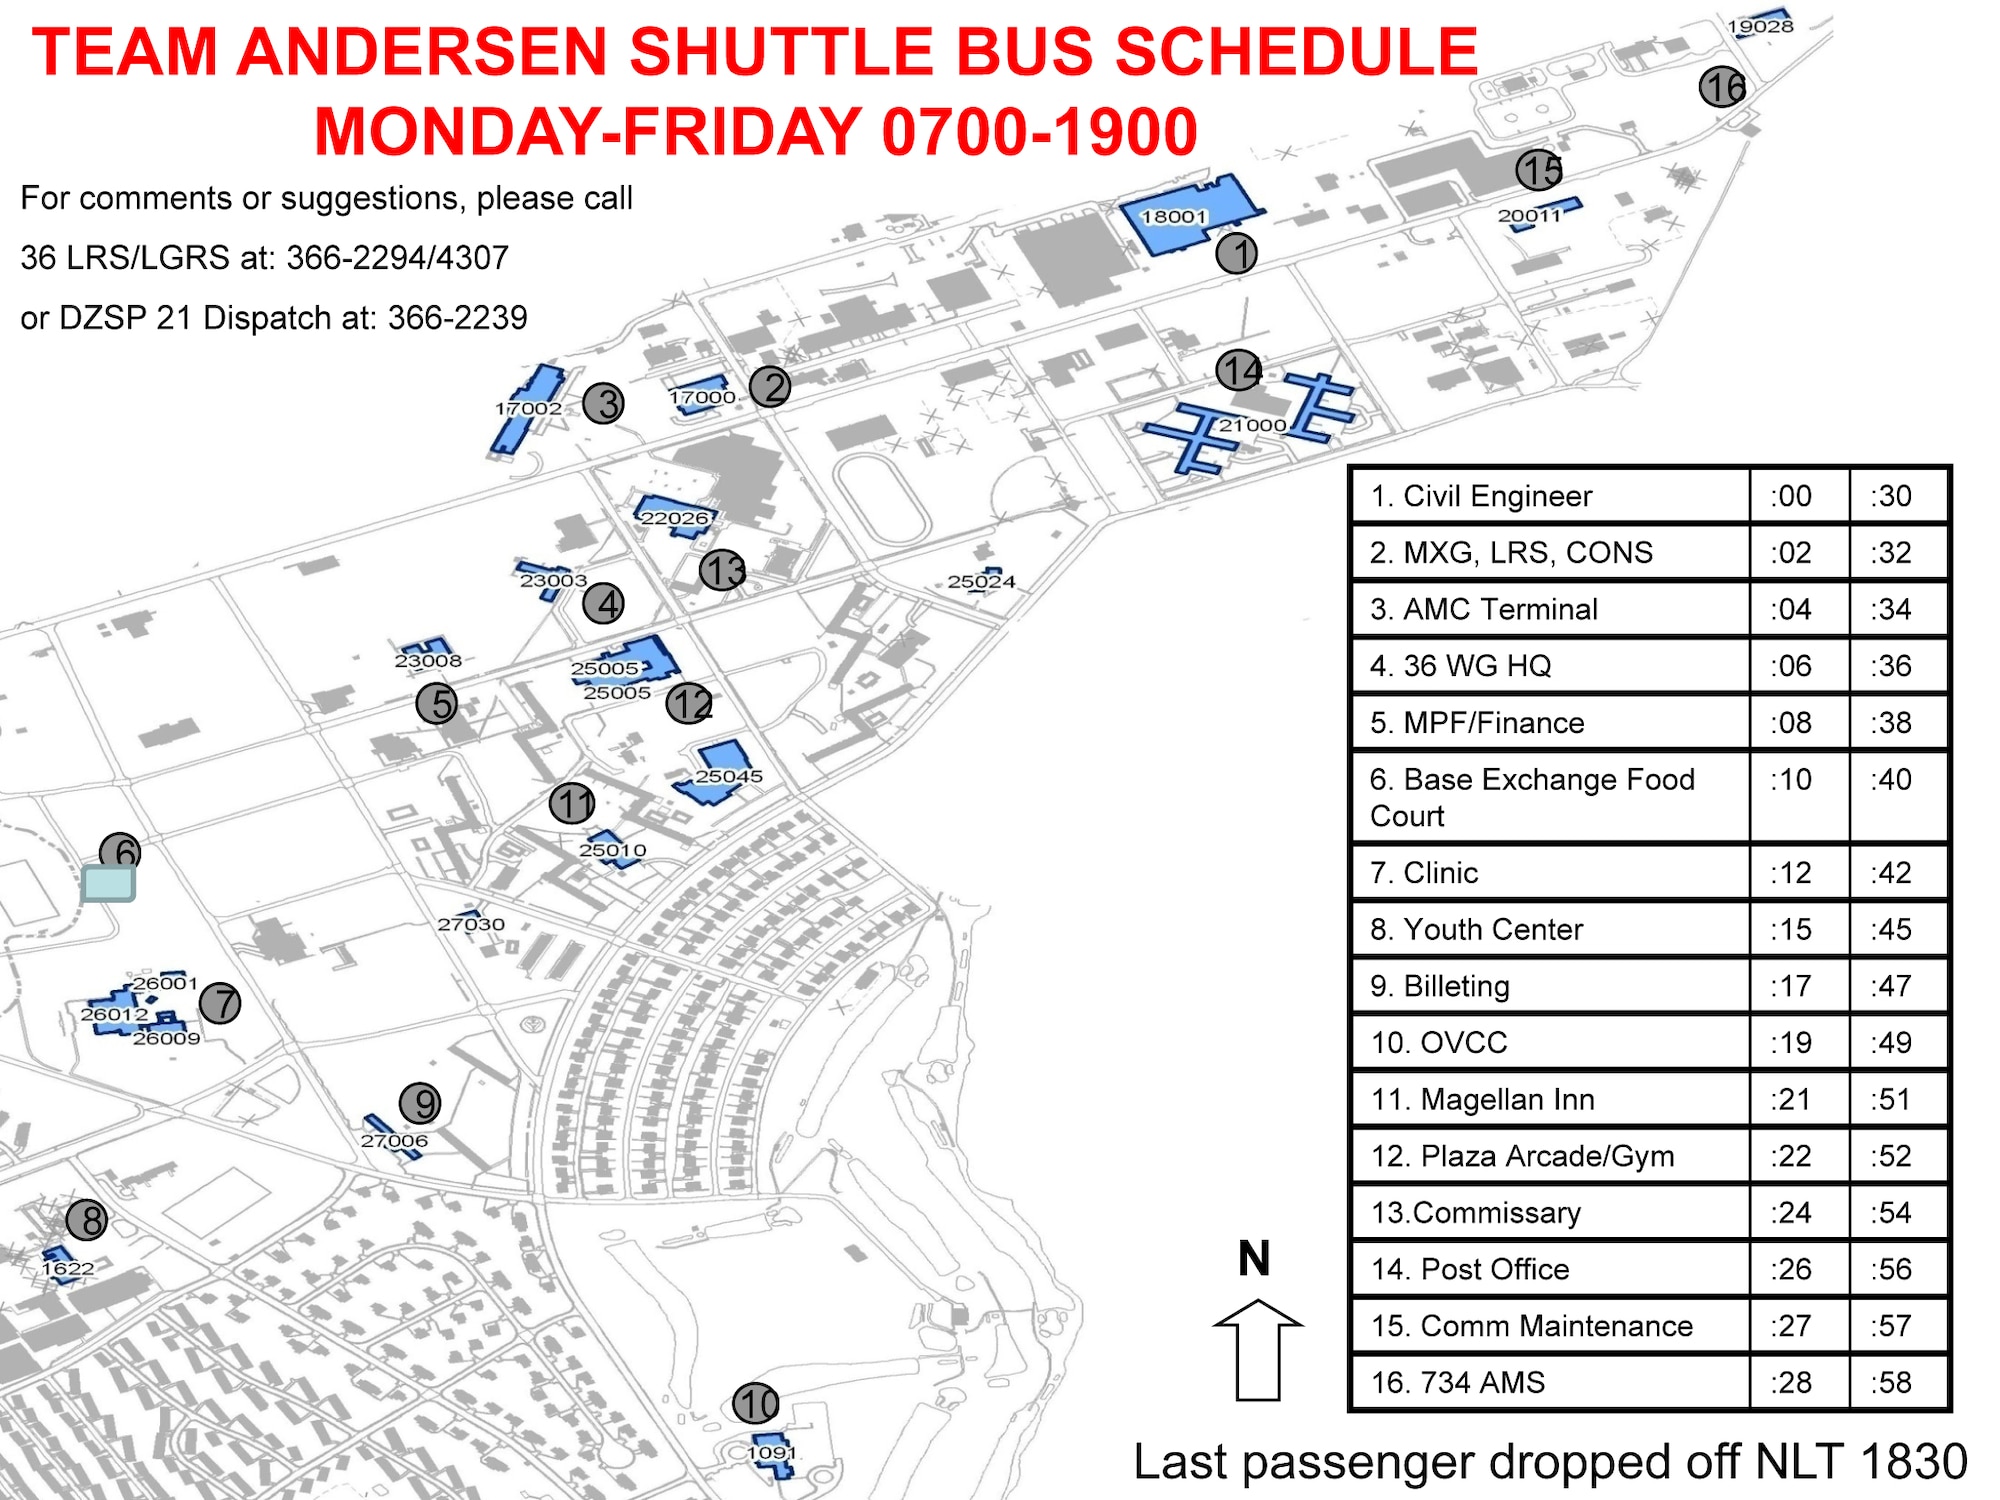 ANDERSEN AIR FORCE BASE, Guam - The Andersen Shuttle Bus will run from 0700-1900 Monday through Friday at 16 locations around Andersen AFB.  If you have comments or suggestions please call 36 LRS/LGRS at 366-2294/4307 or the DZSP 21 dispatch at 366-2239.